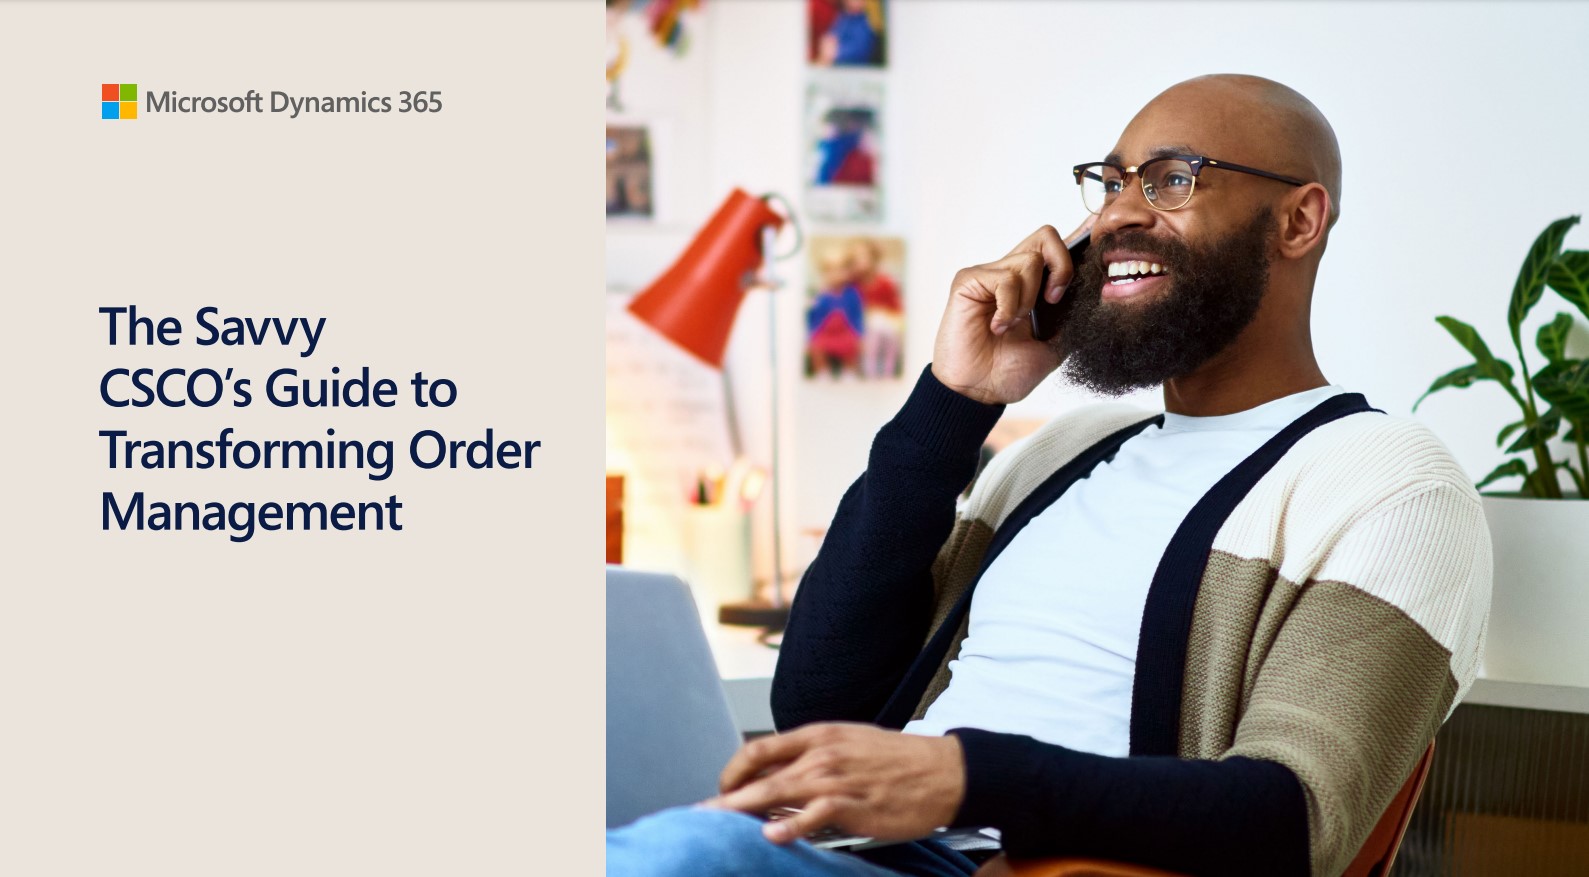 The Savvy CSCO’s Guide to Transforming Order Management